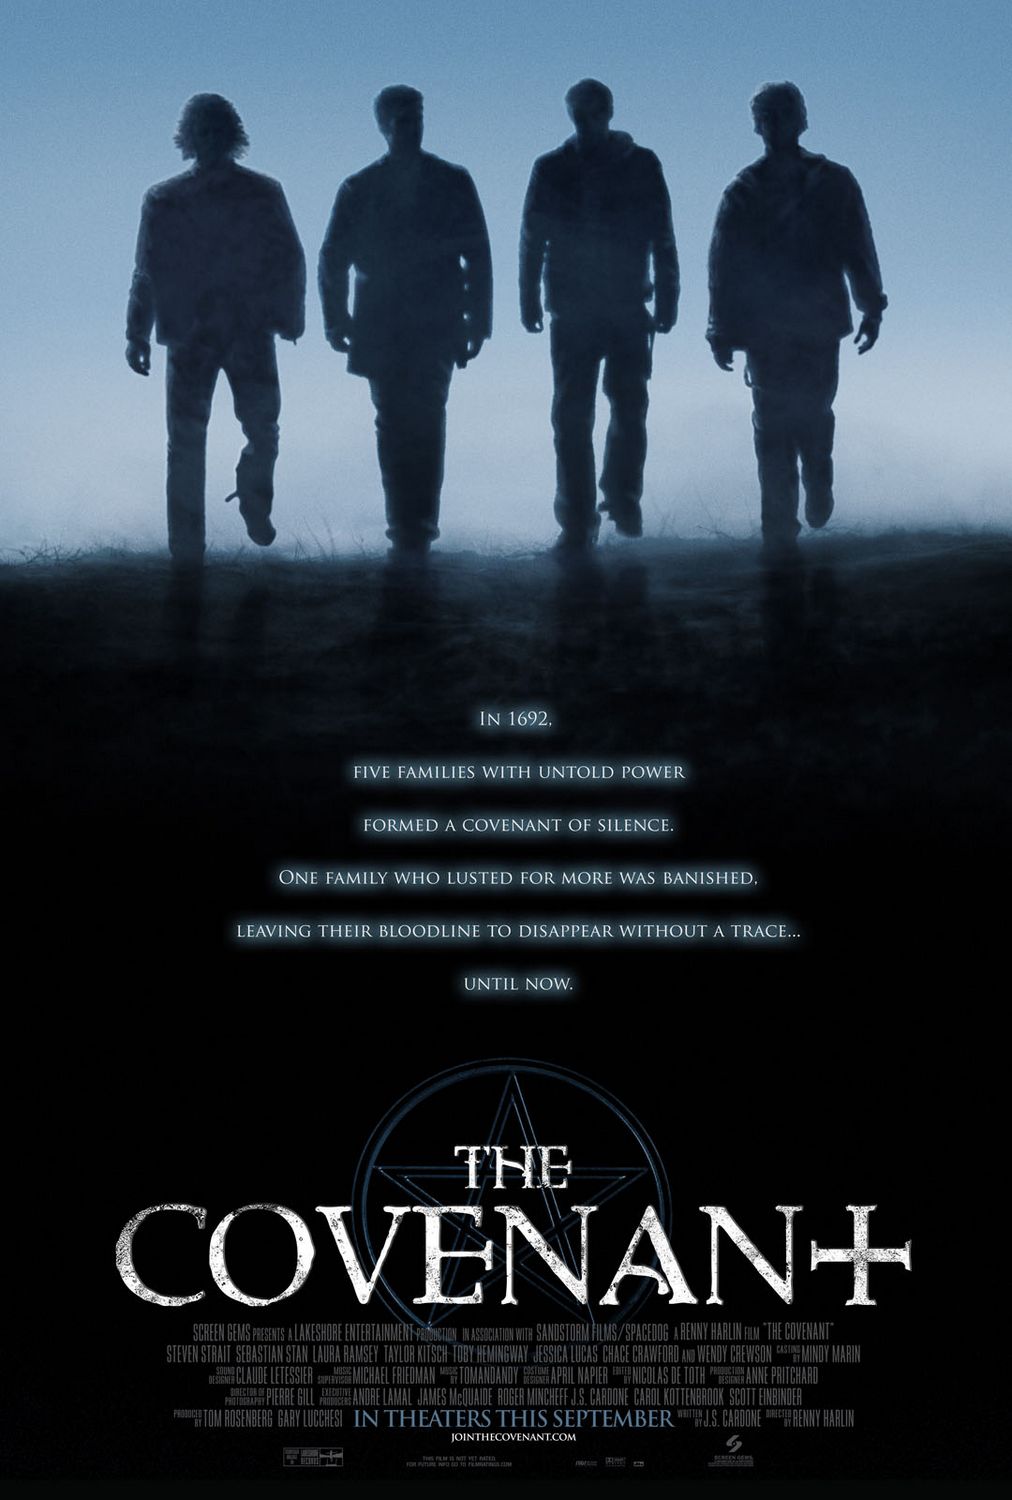 COVENANT, THE